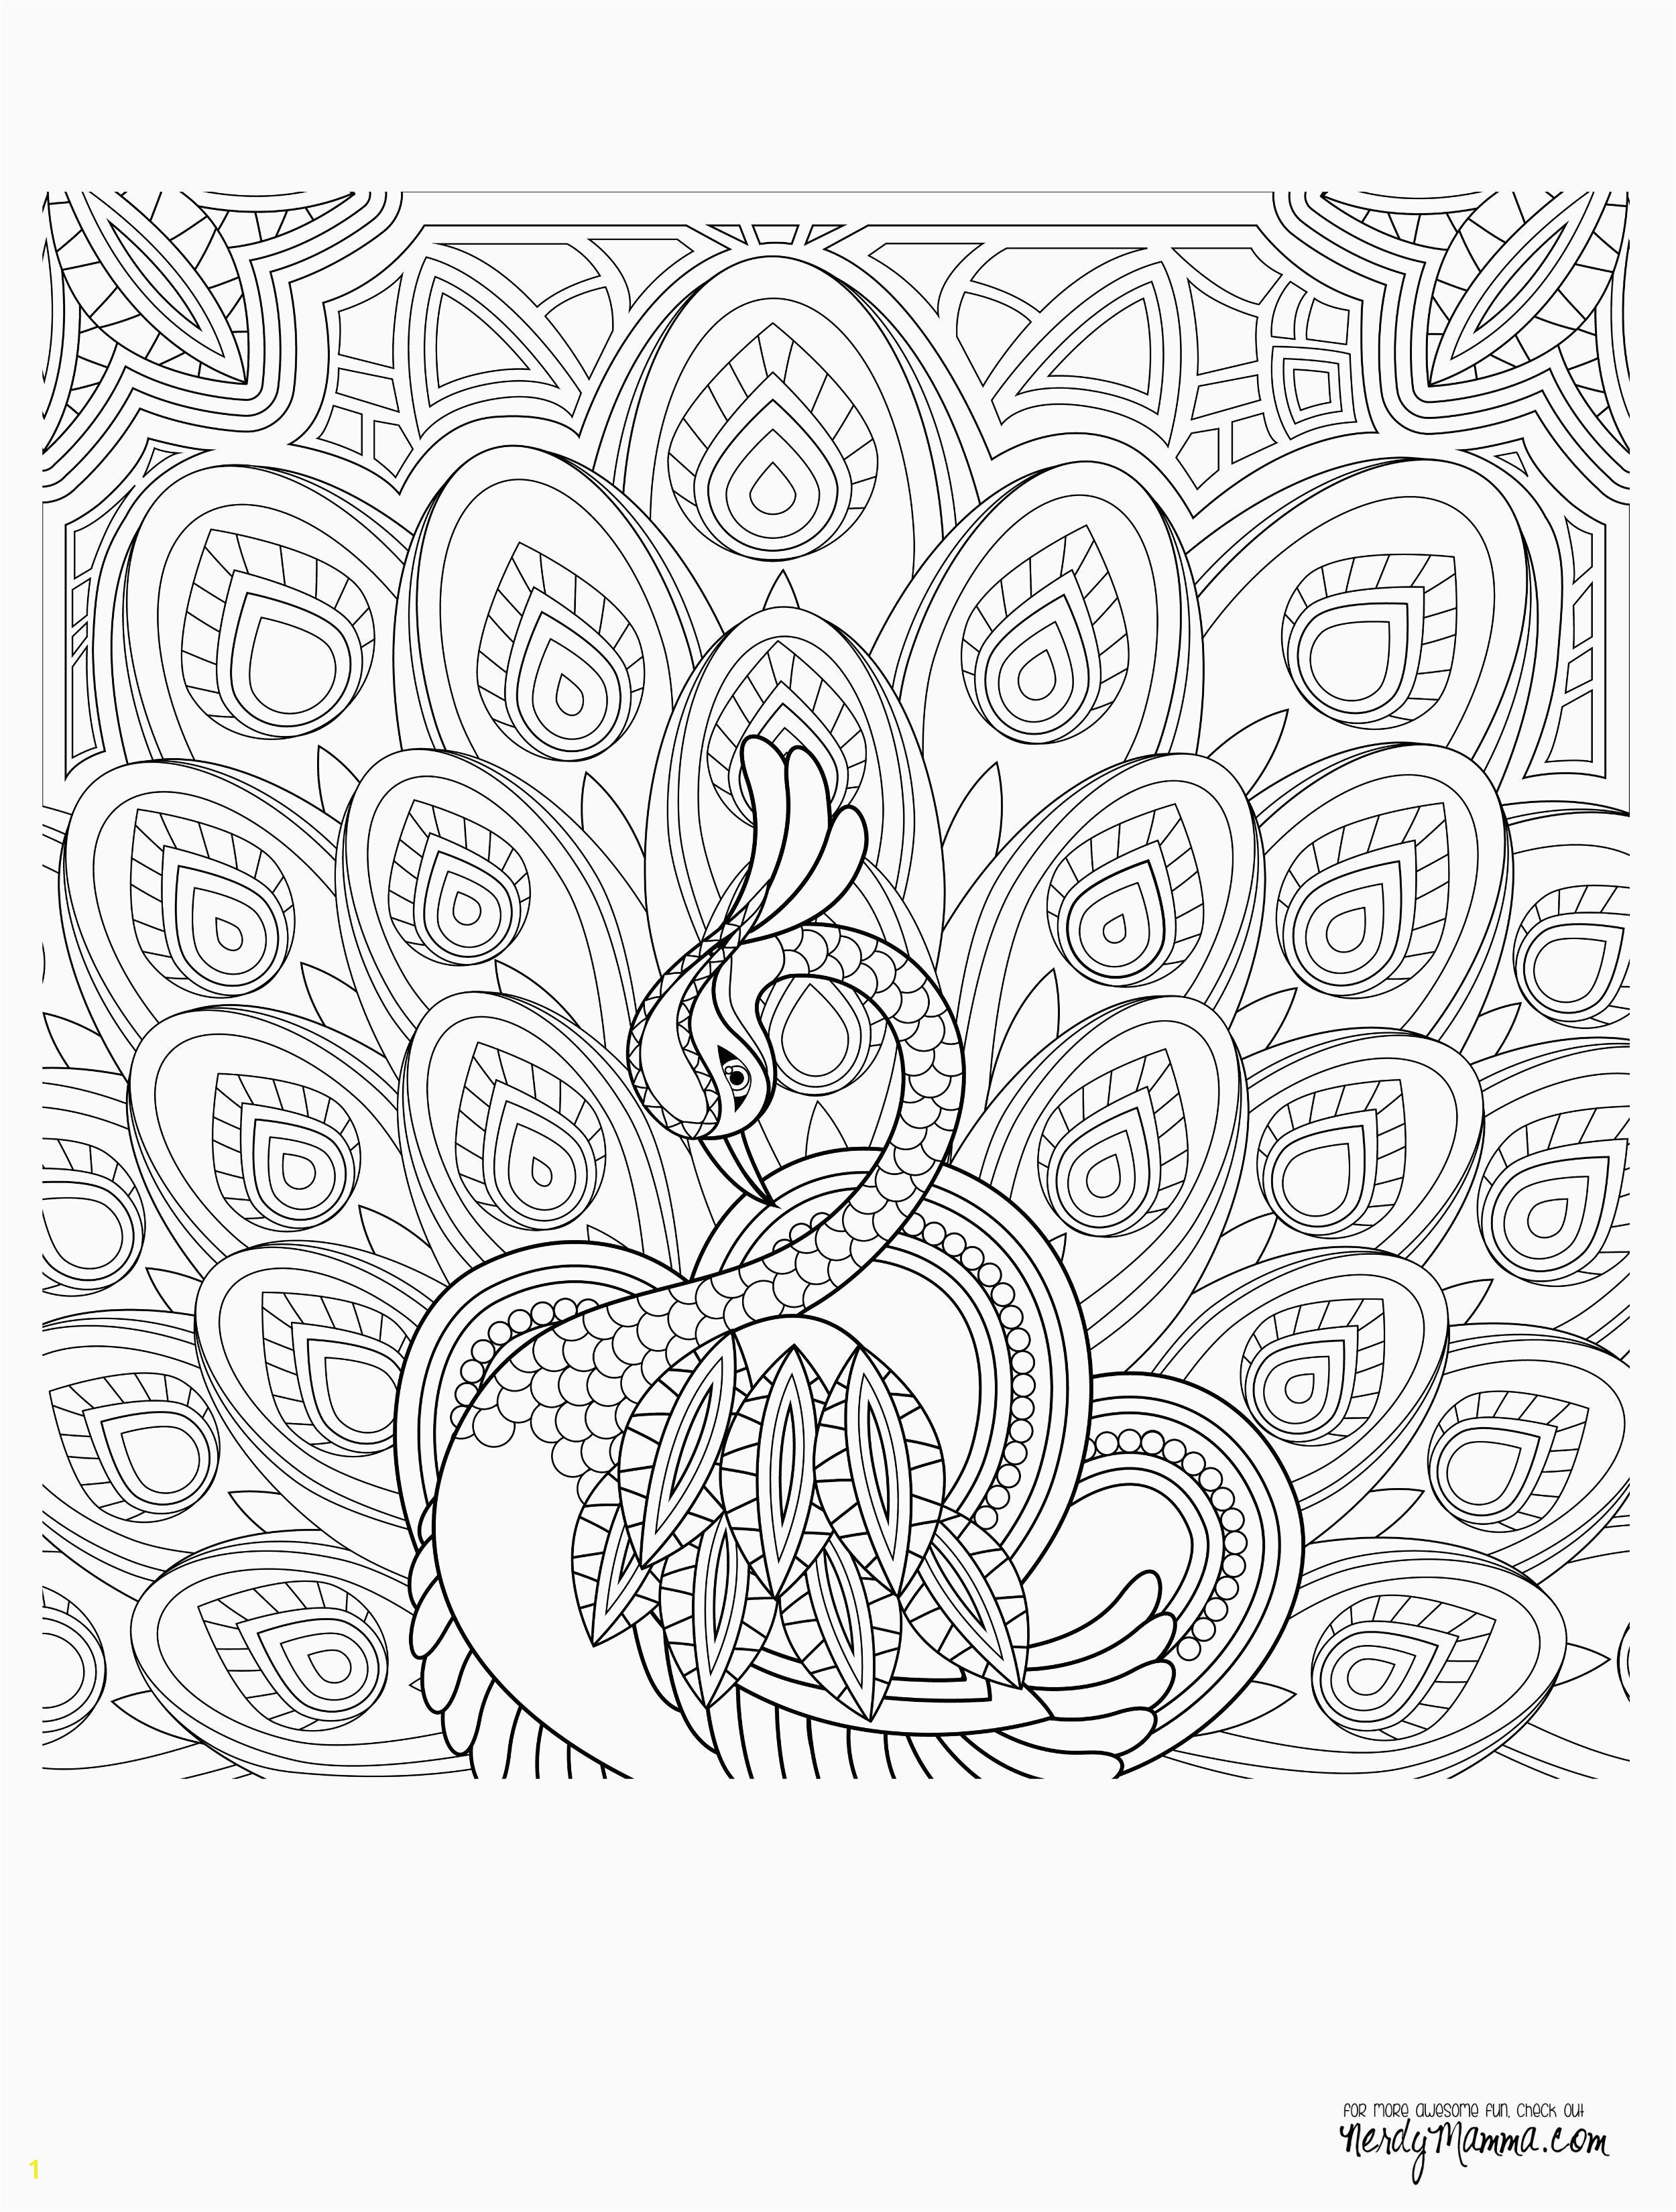 Fresh Sponge Bob Coloring Pages Beautiful Mal Coloring Pages Fresh Crayola